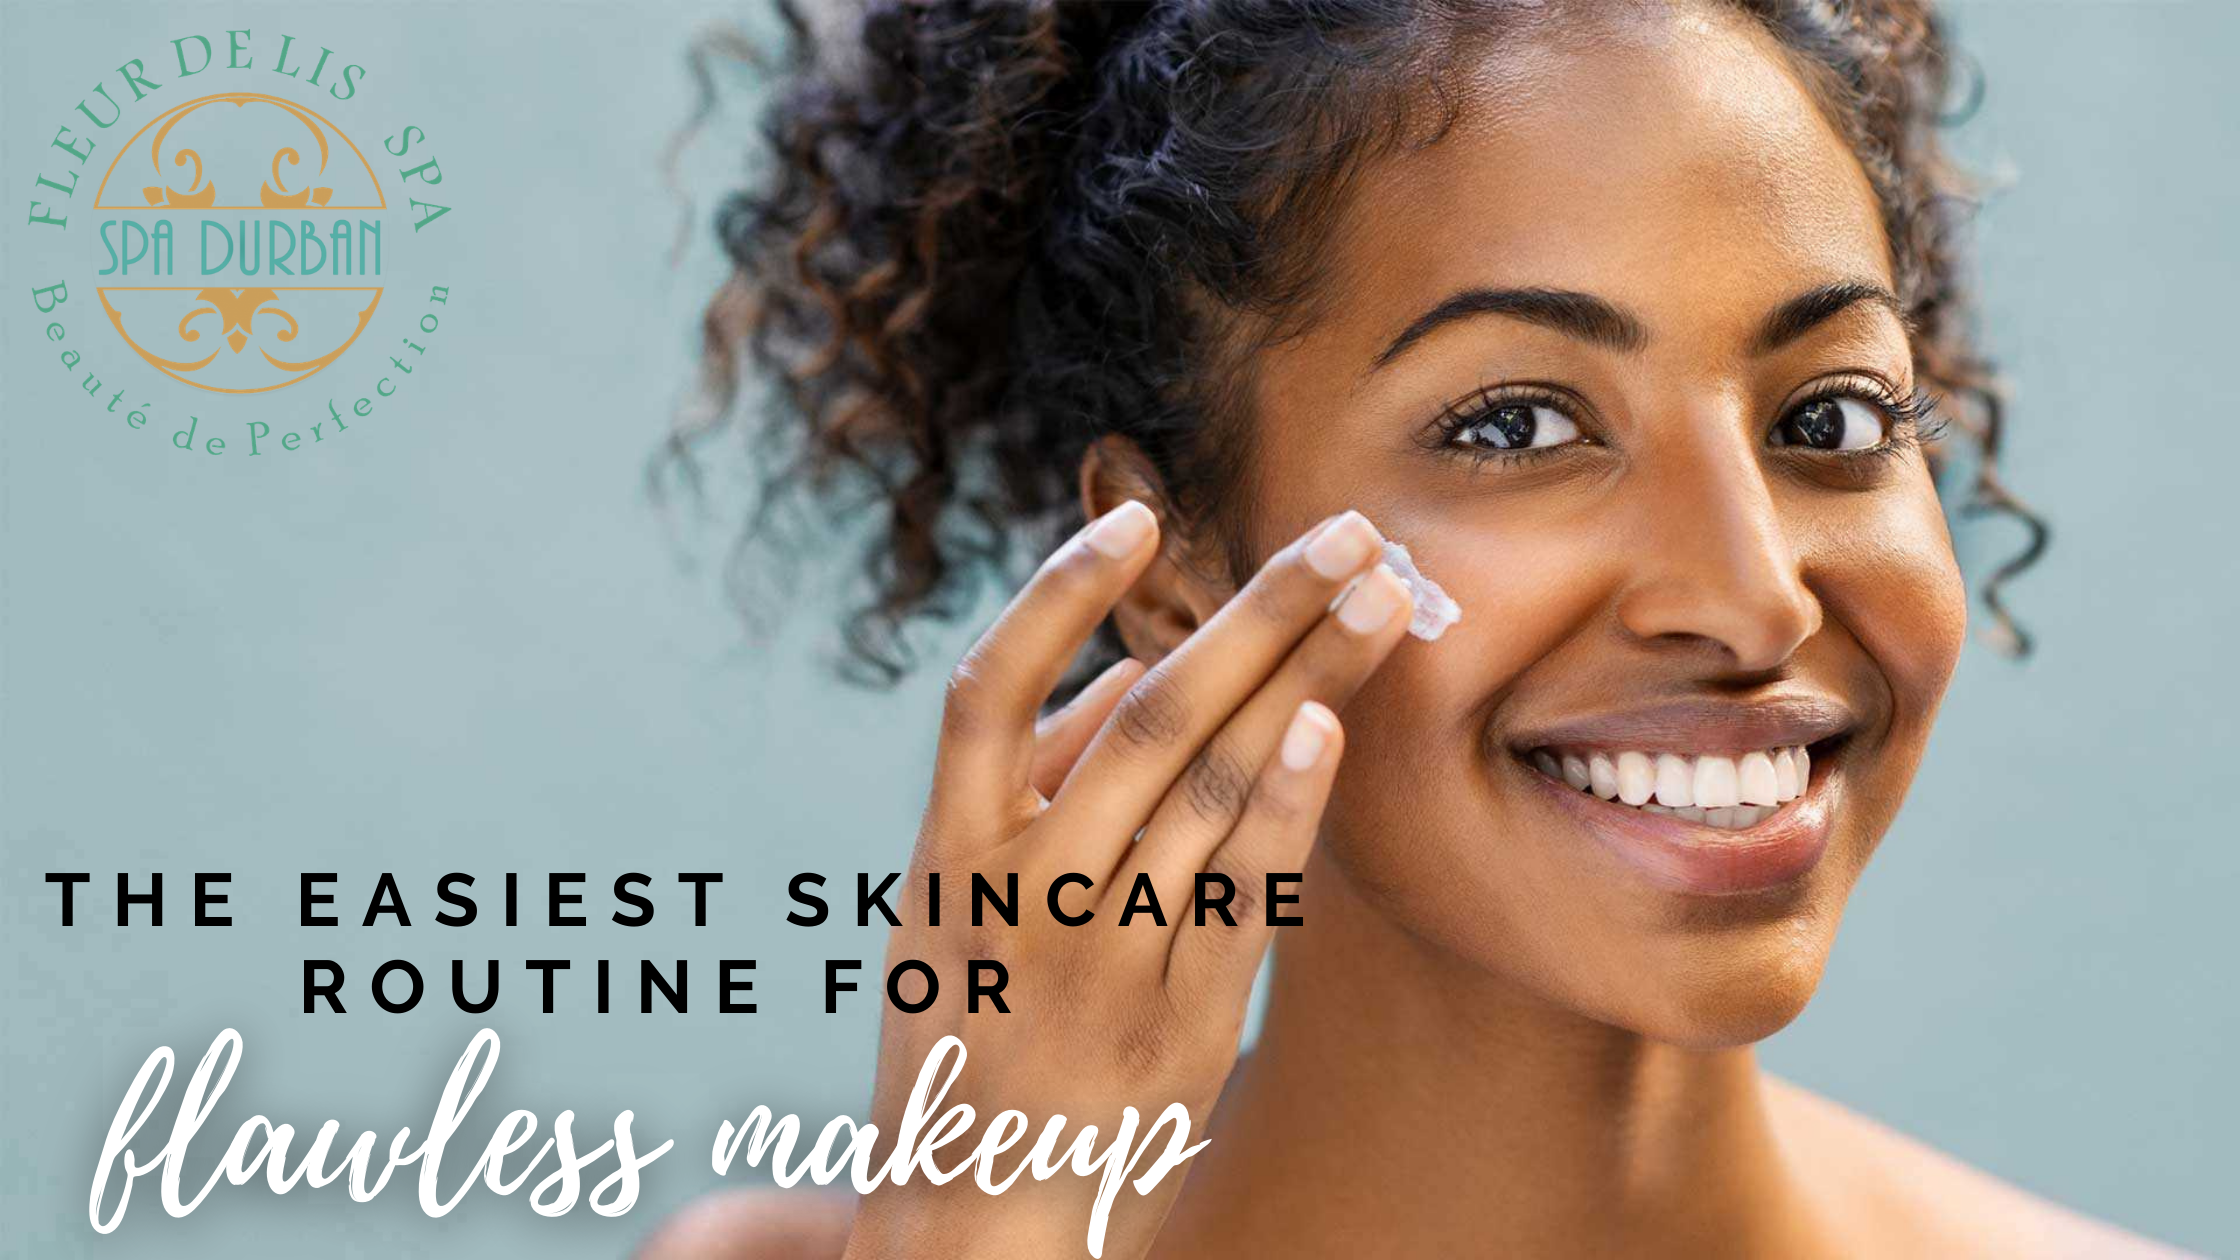 The Easiest Skincare Routine for Flawless Makeup!